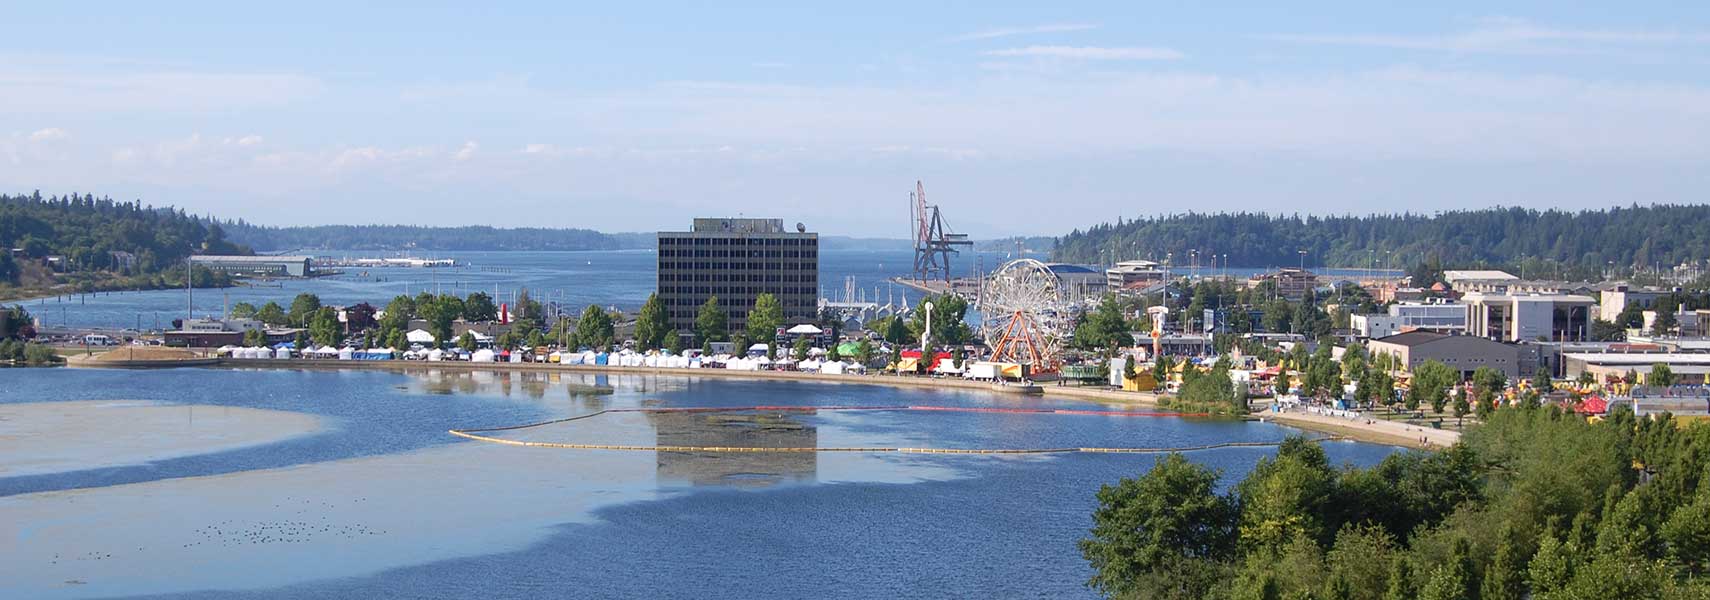 Annual Lakefair on the shores of Capitol Lake in Olympia